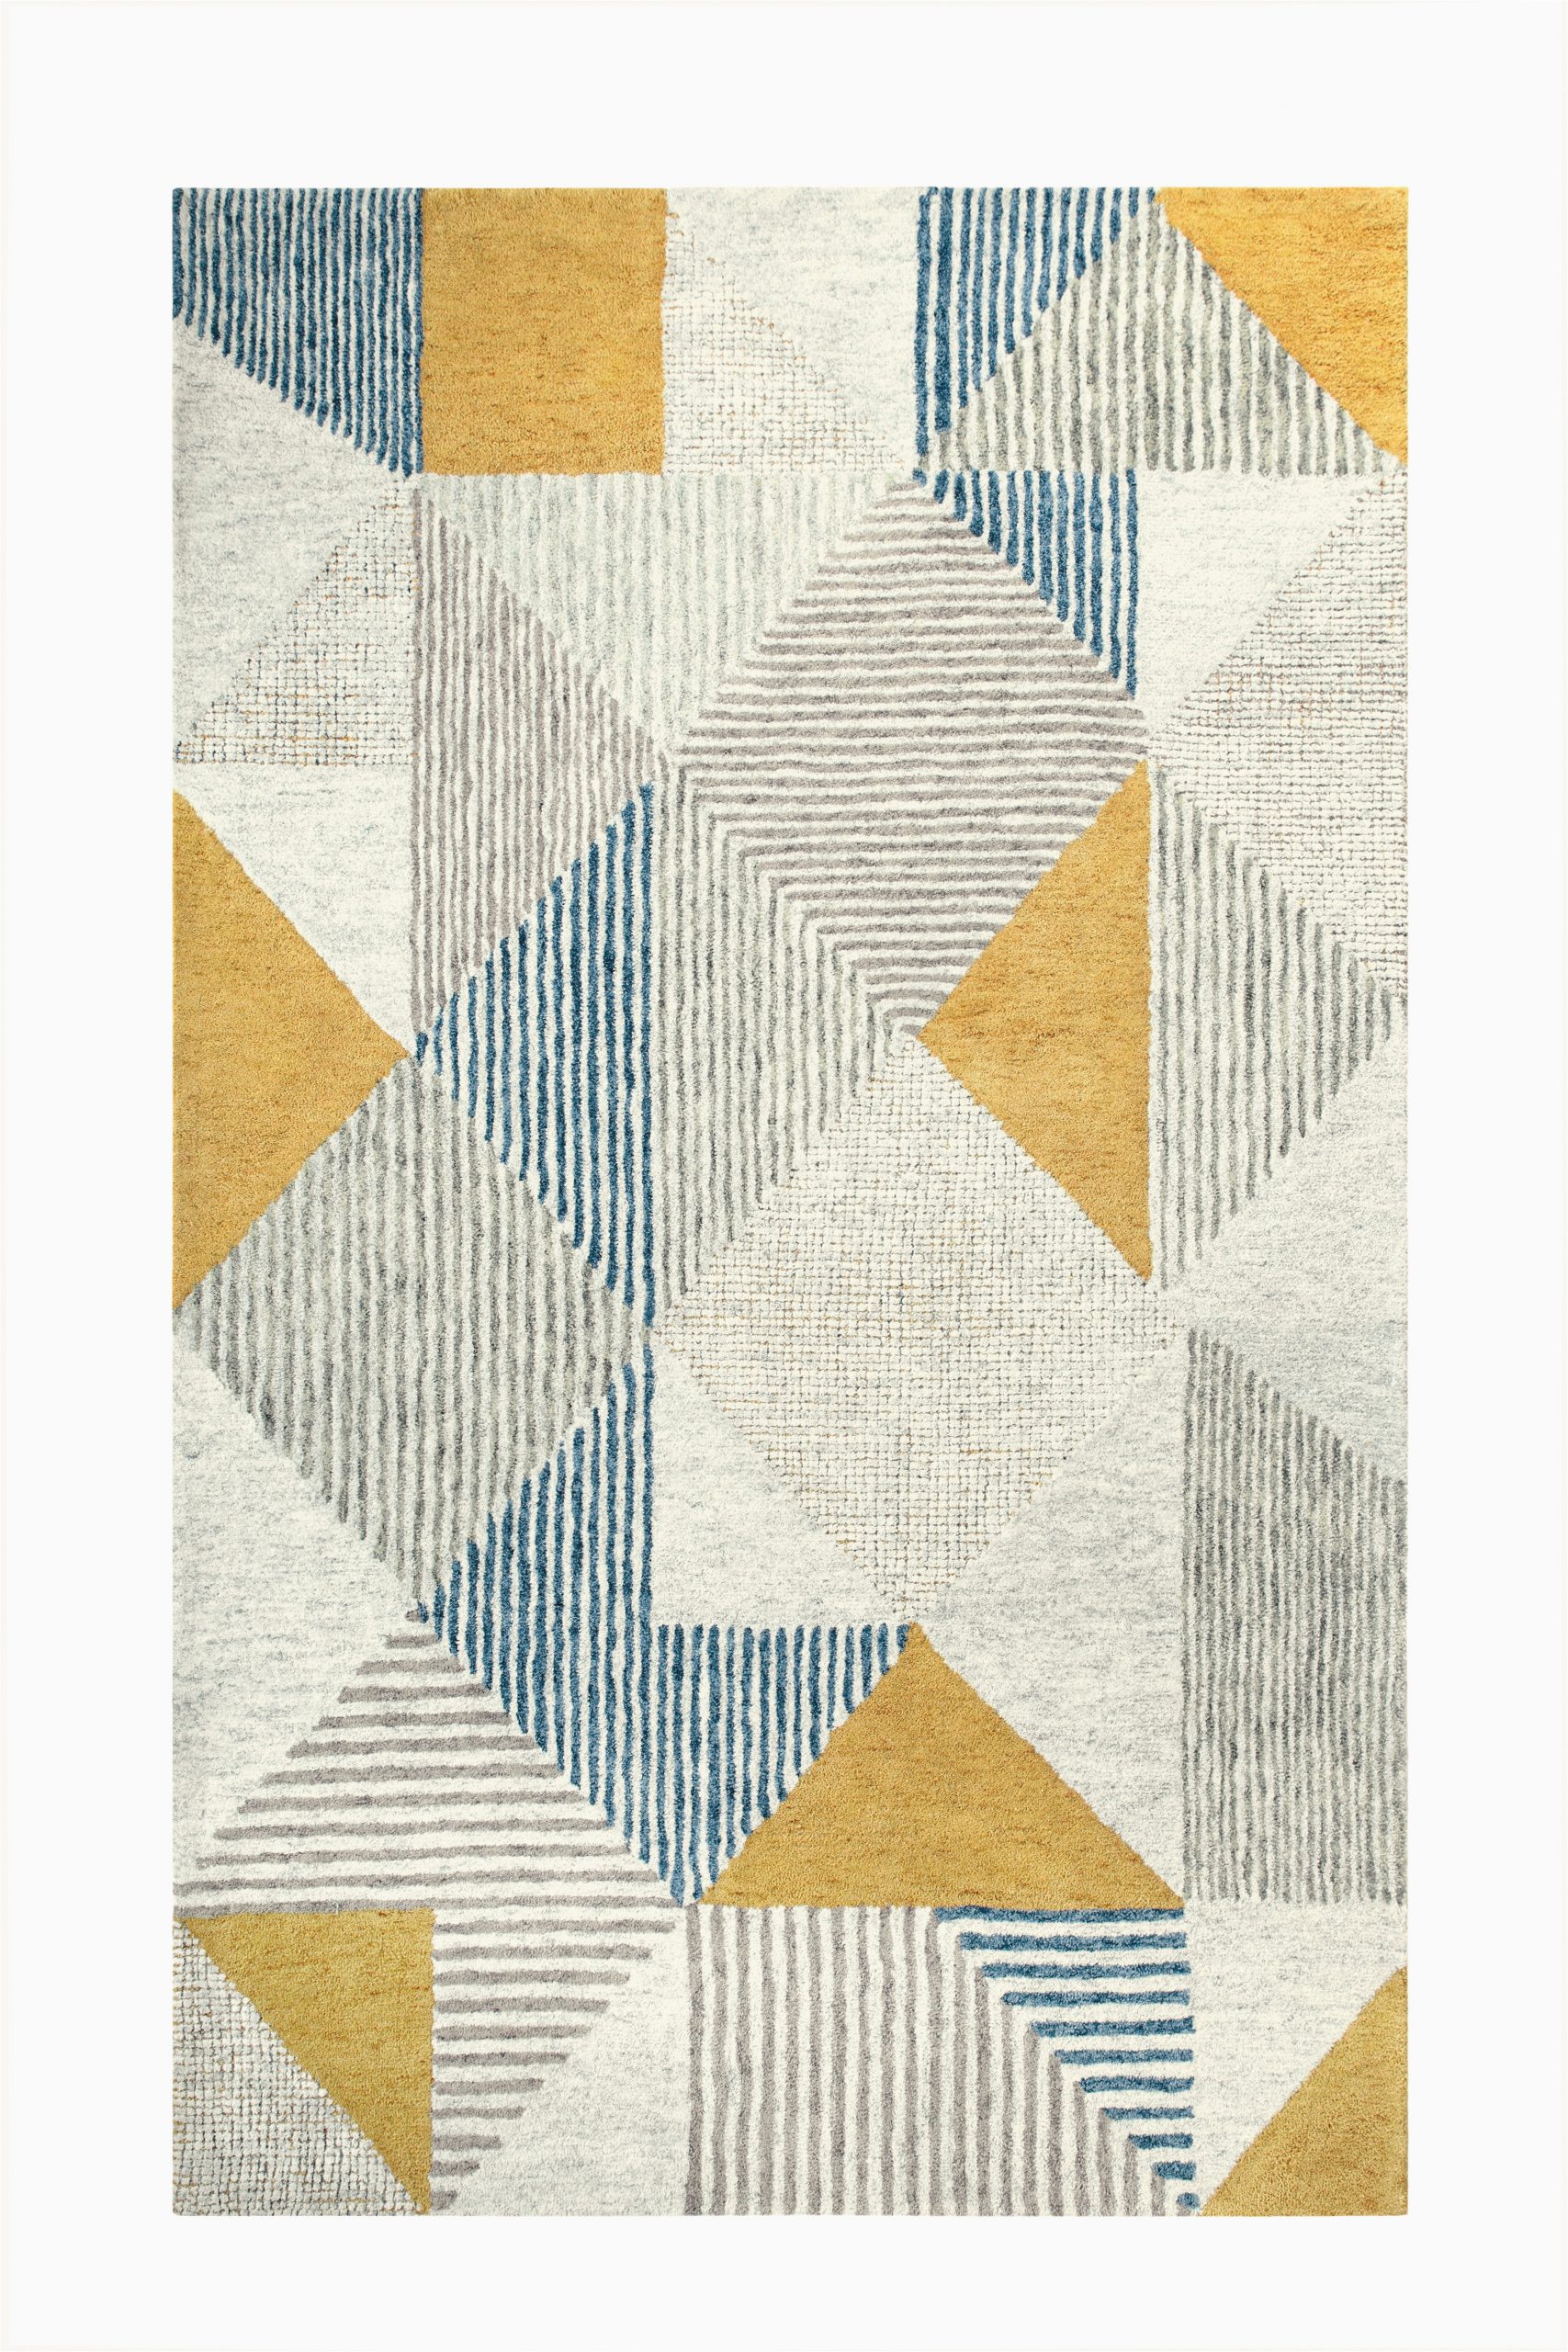 Blue and Gray Wool Rug Griffin Geometric Handmade Tufted Wool Blue Gray Yellow area Rug